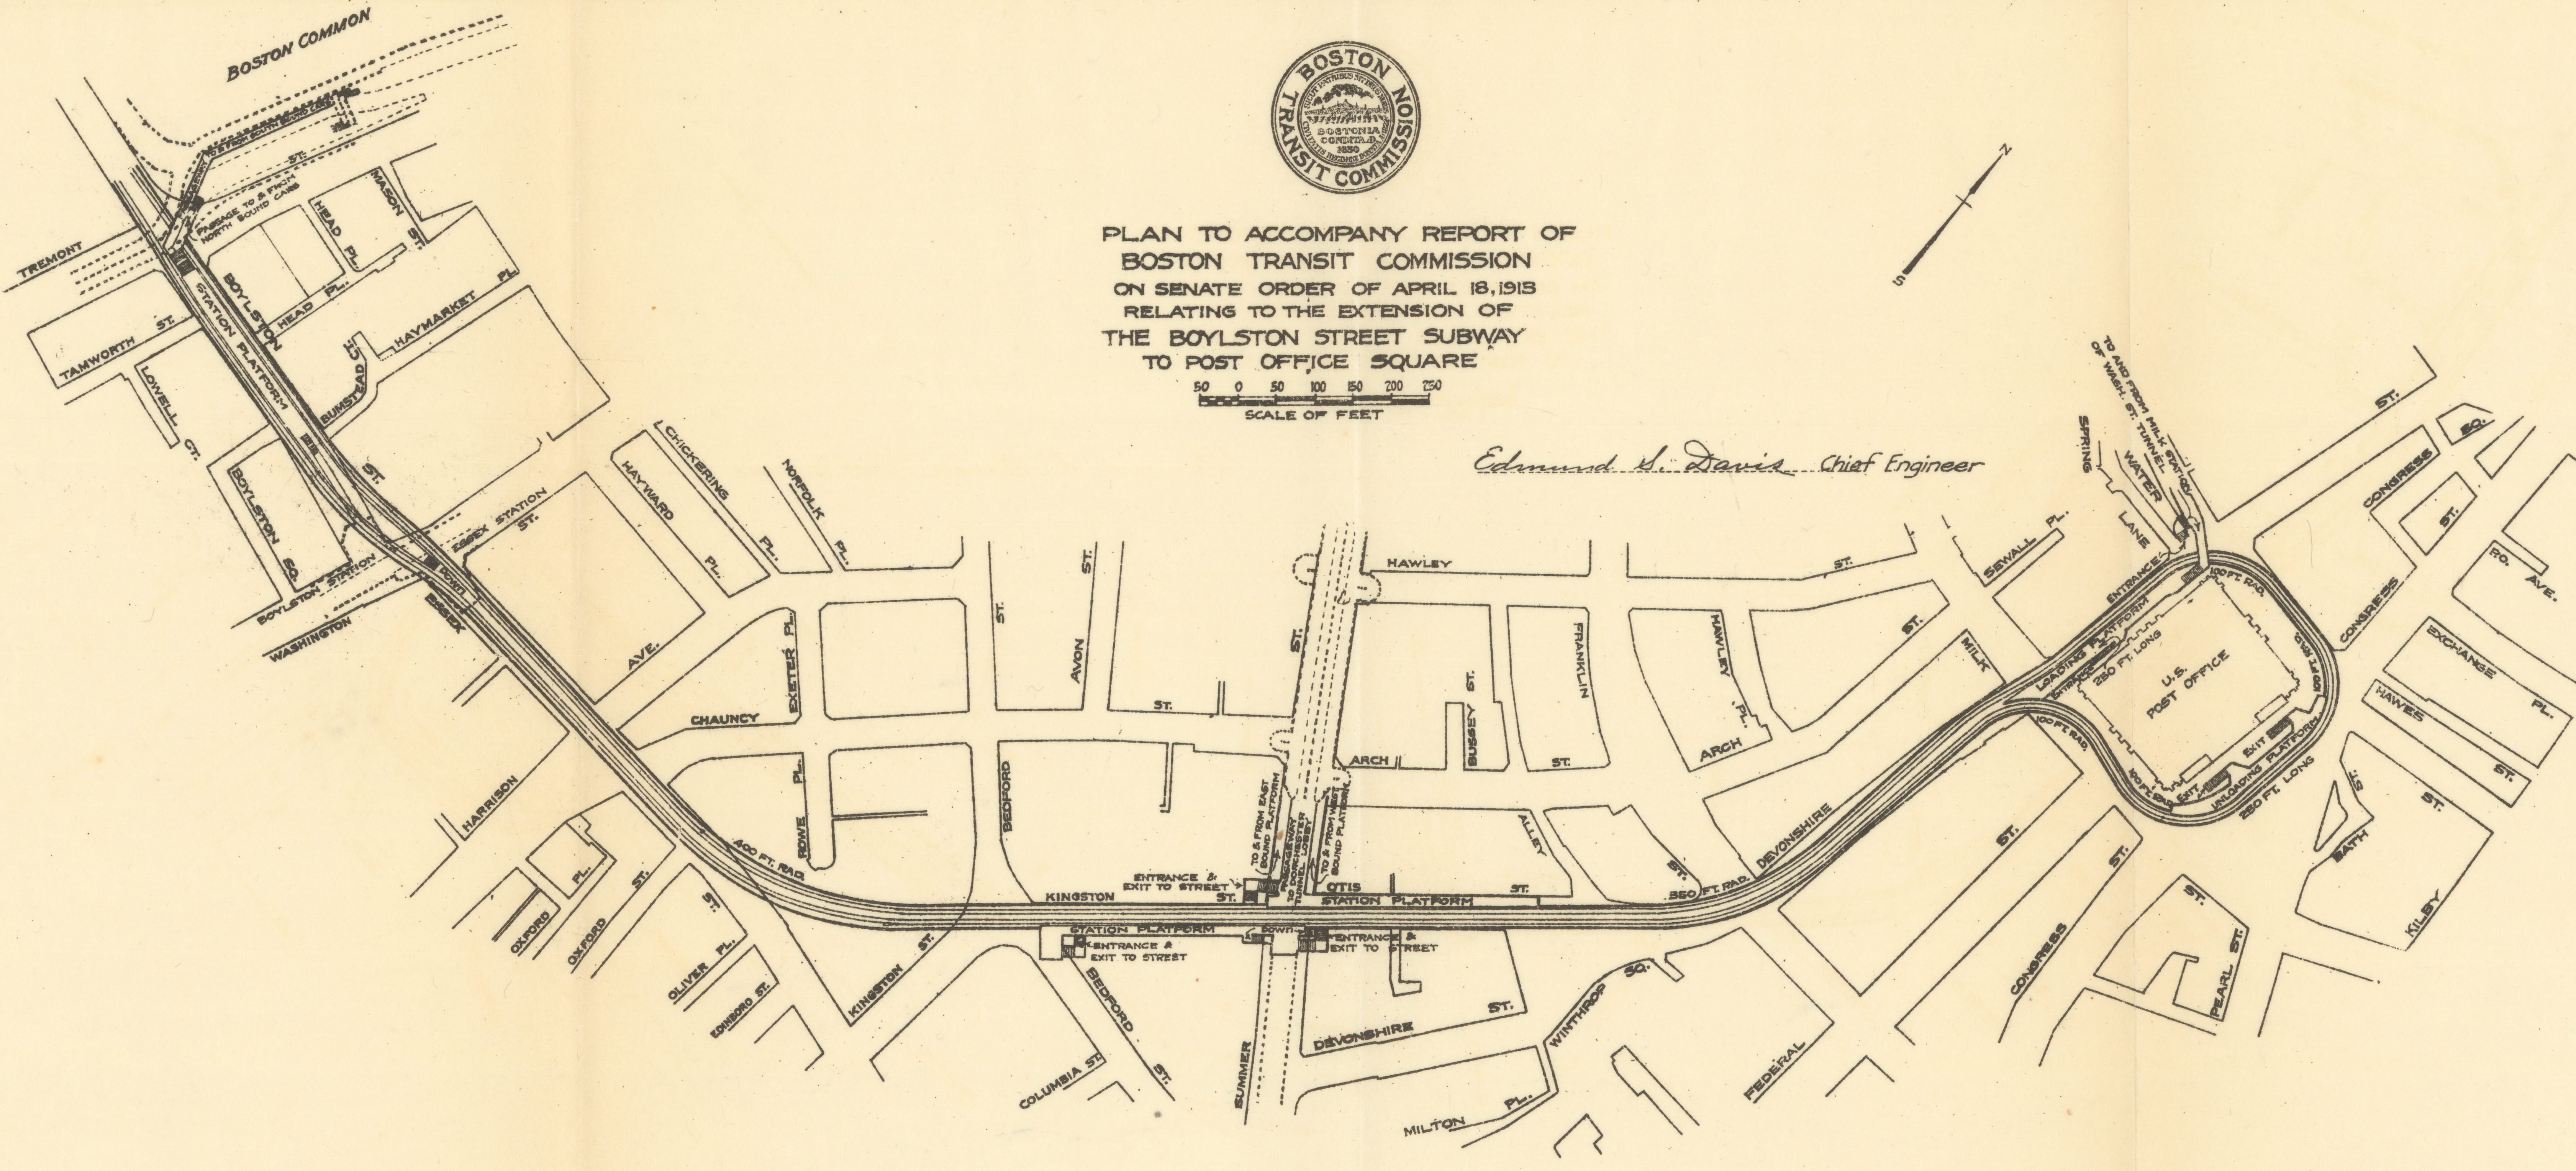 Image of “Plan ... Relating to the Extension of the Boylston Street Subway to Post Office Square” from “Nineteenth Annual Report of the Boston Transit Commission”